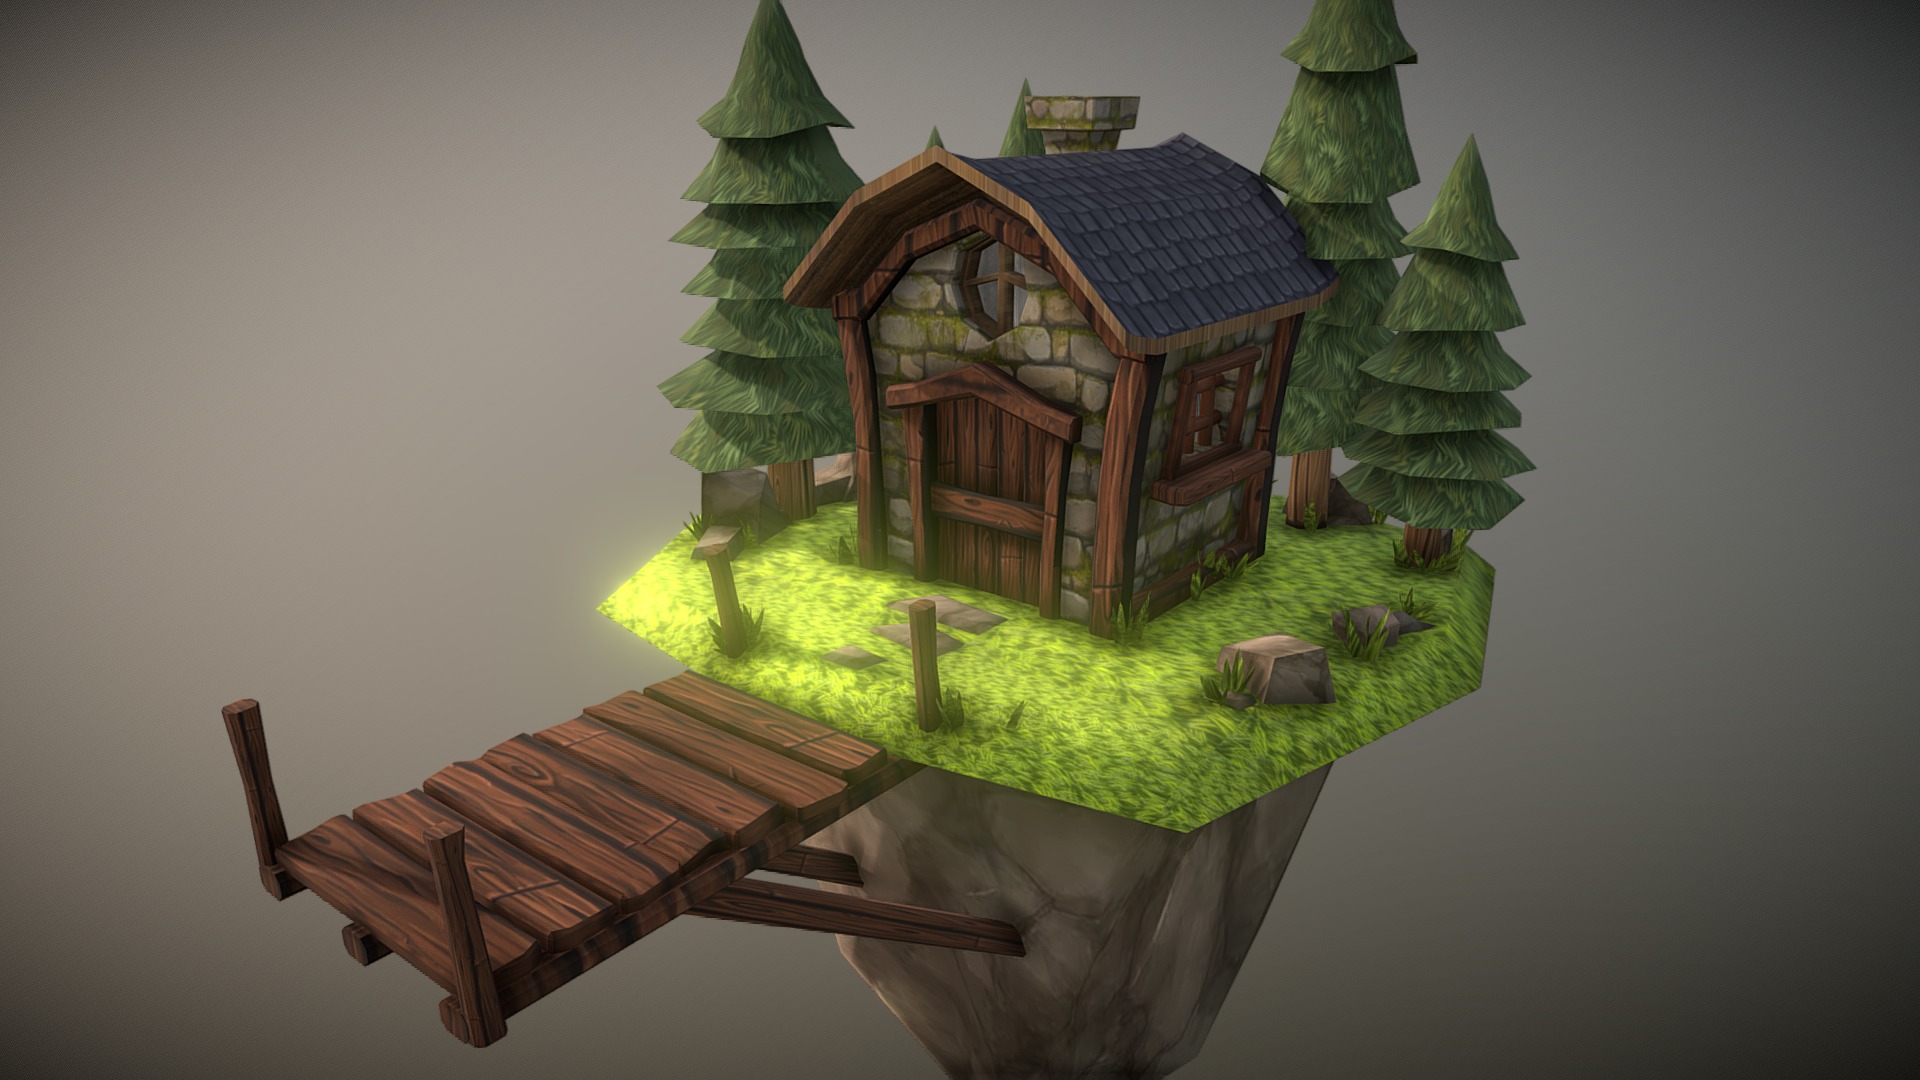 3D model Tiny Cabin Fantasy Textured For Challenge - This is a 3D model of the Tiny Cabin Fantasy Textured For Challenge. The 3D model is about a toy house on a table.